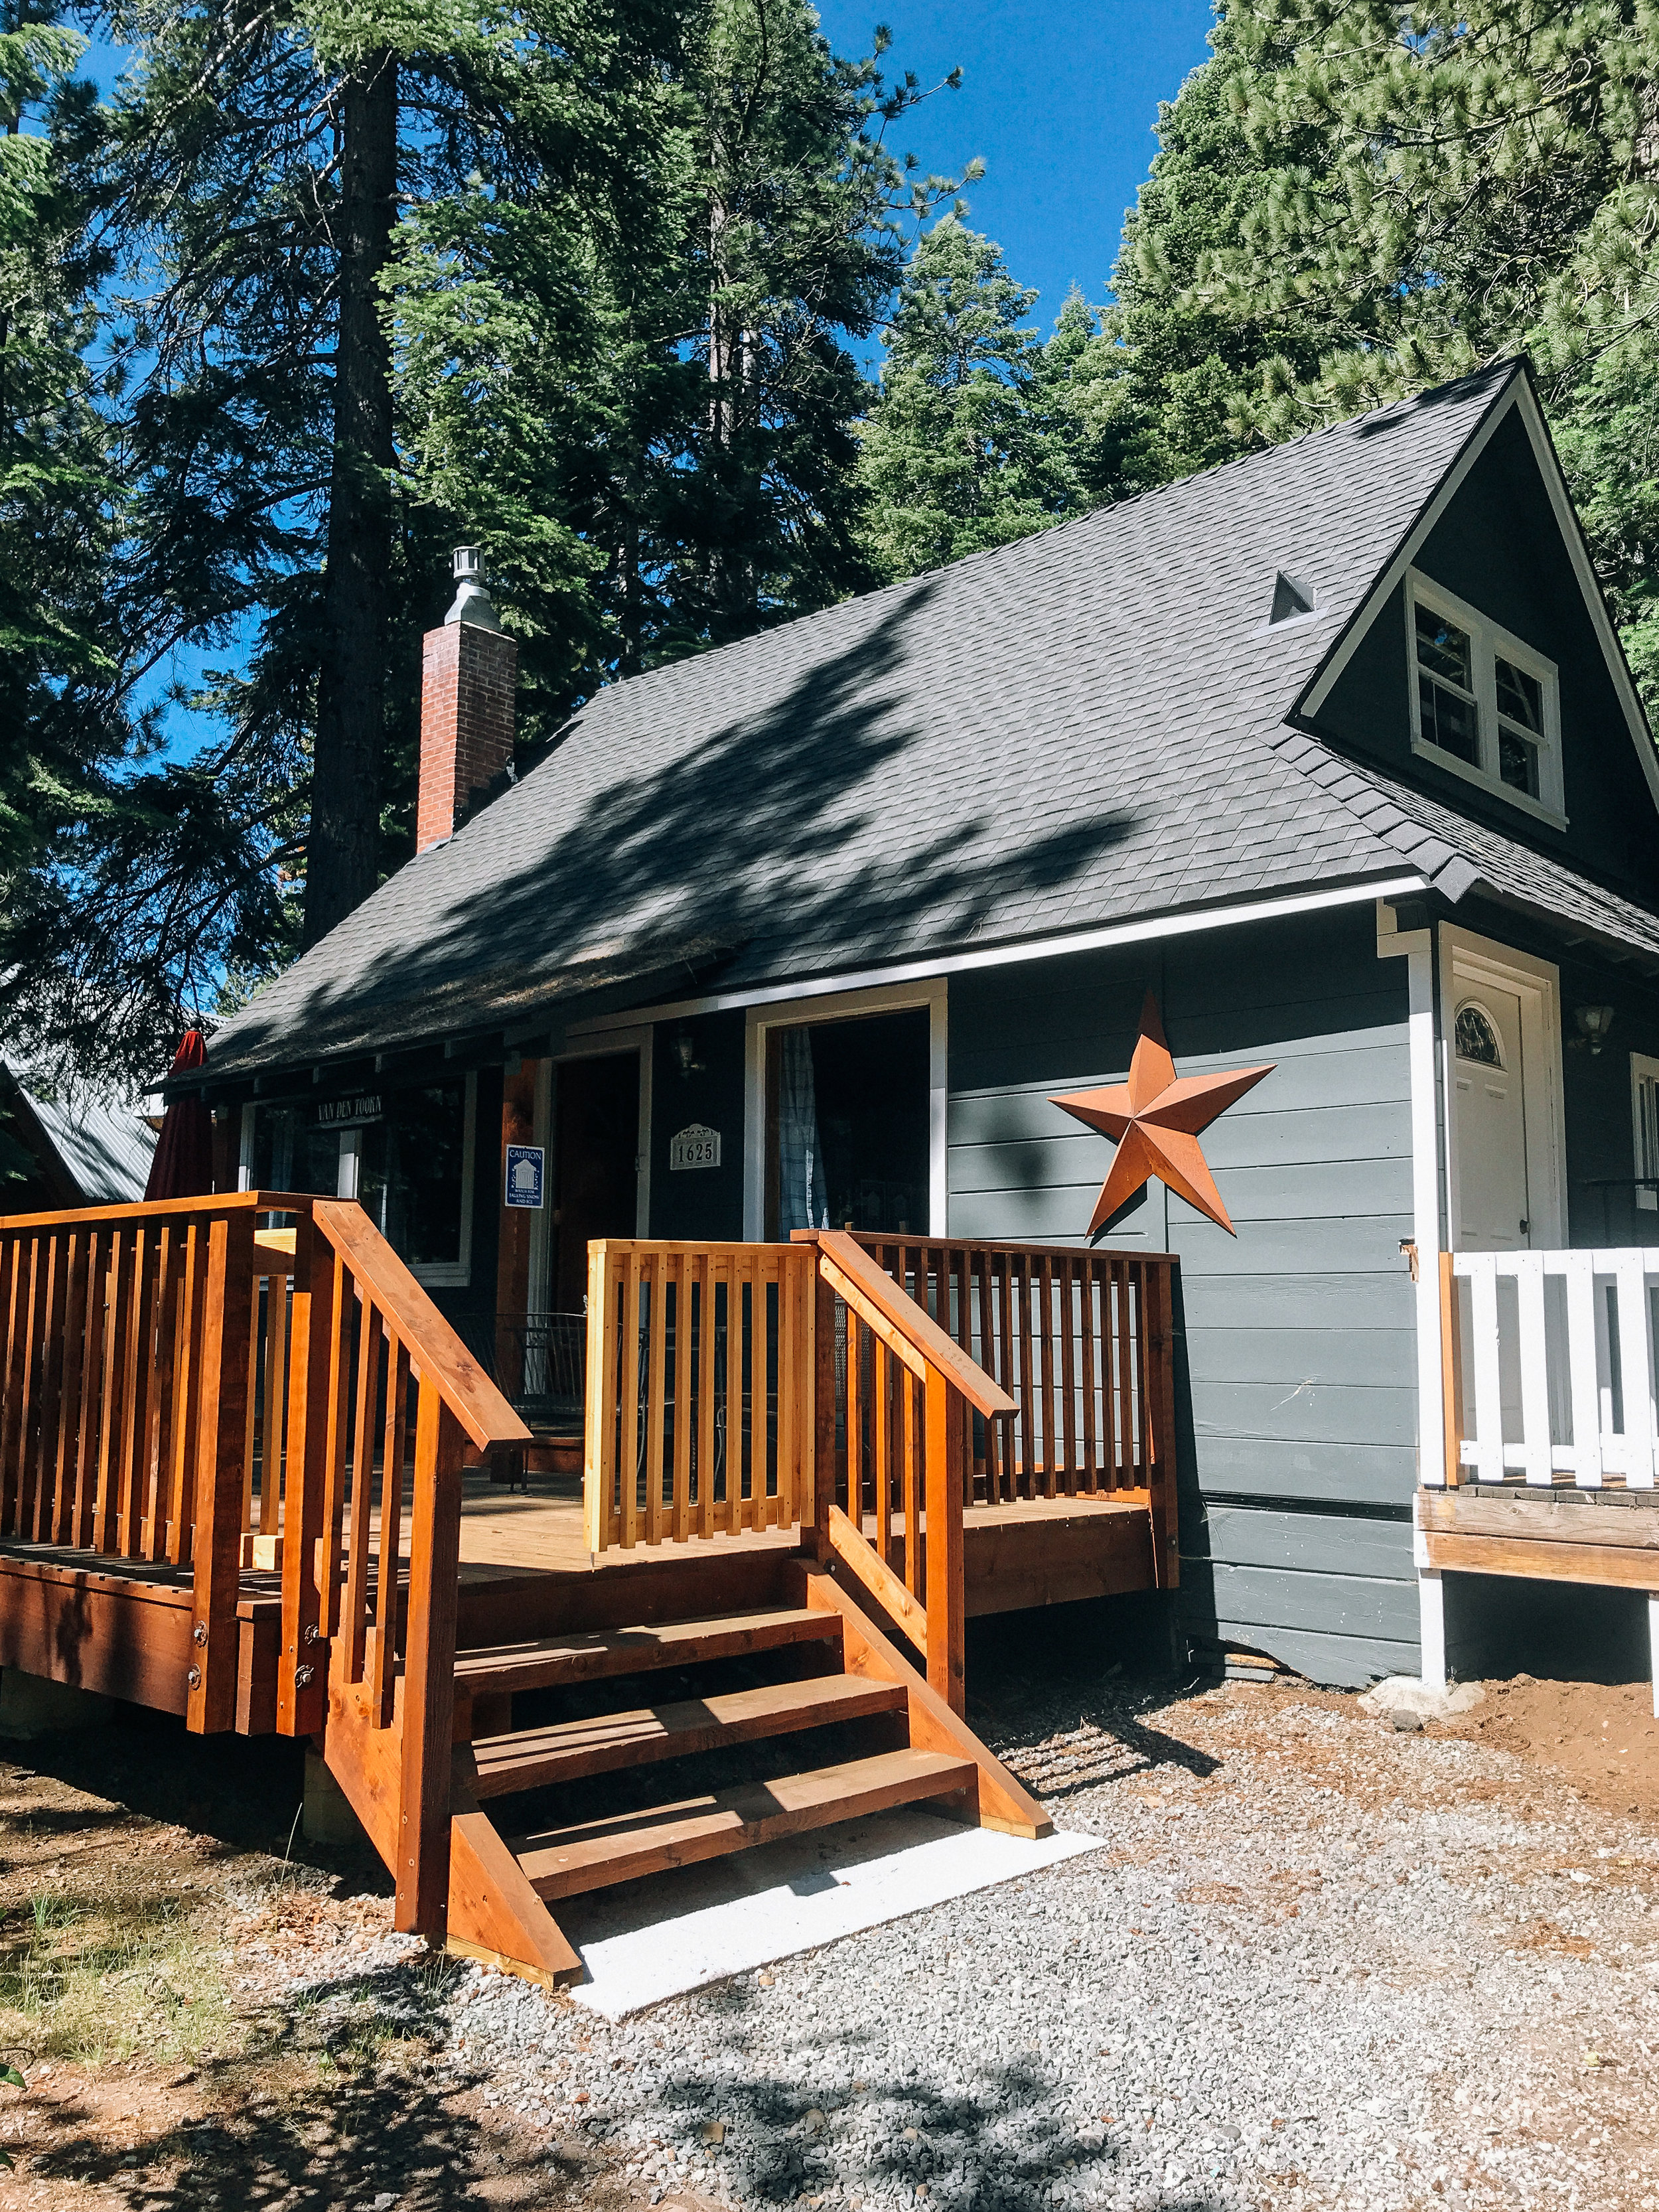 Our Rustic Airbnb In Lake Tahoe From Coast To Coast